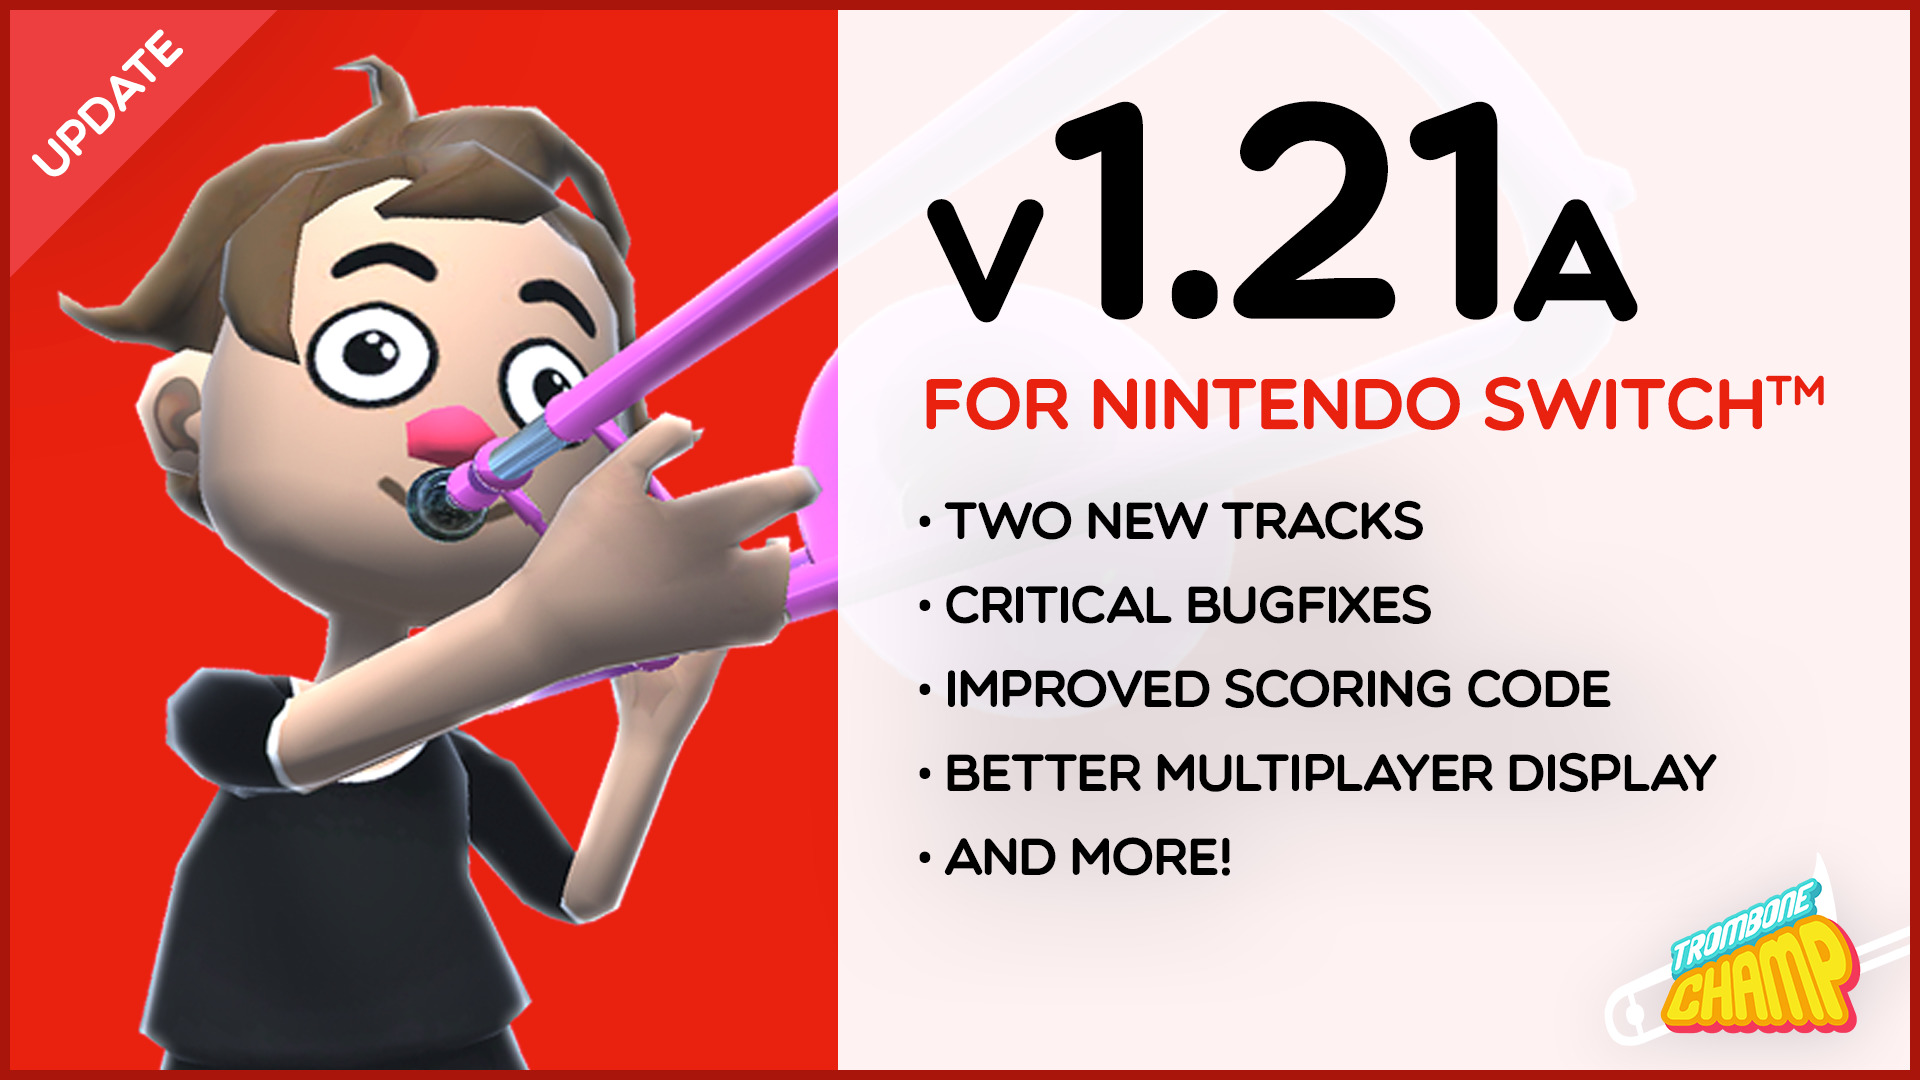 Version 1.21A comes to the Nintendo Switch™